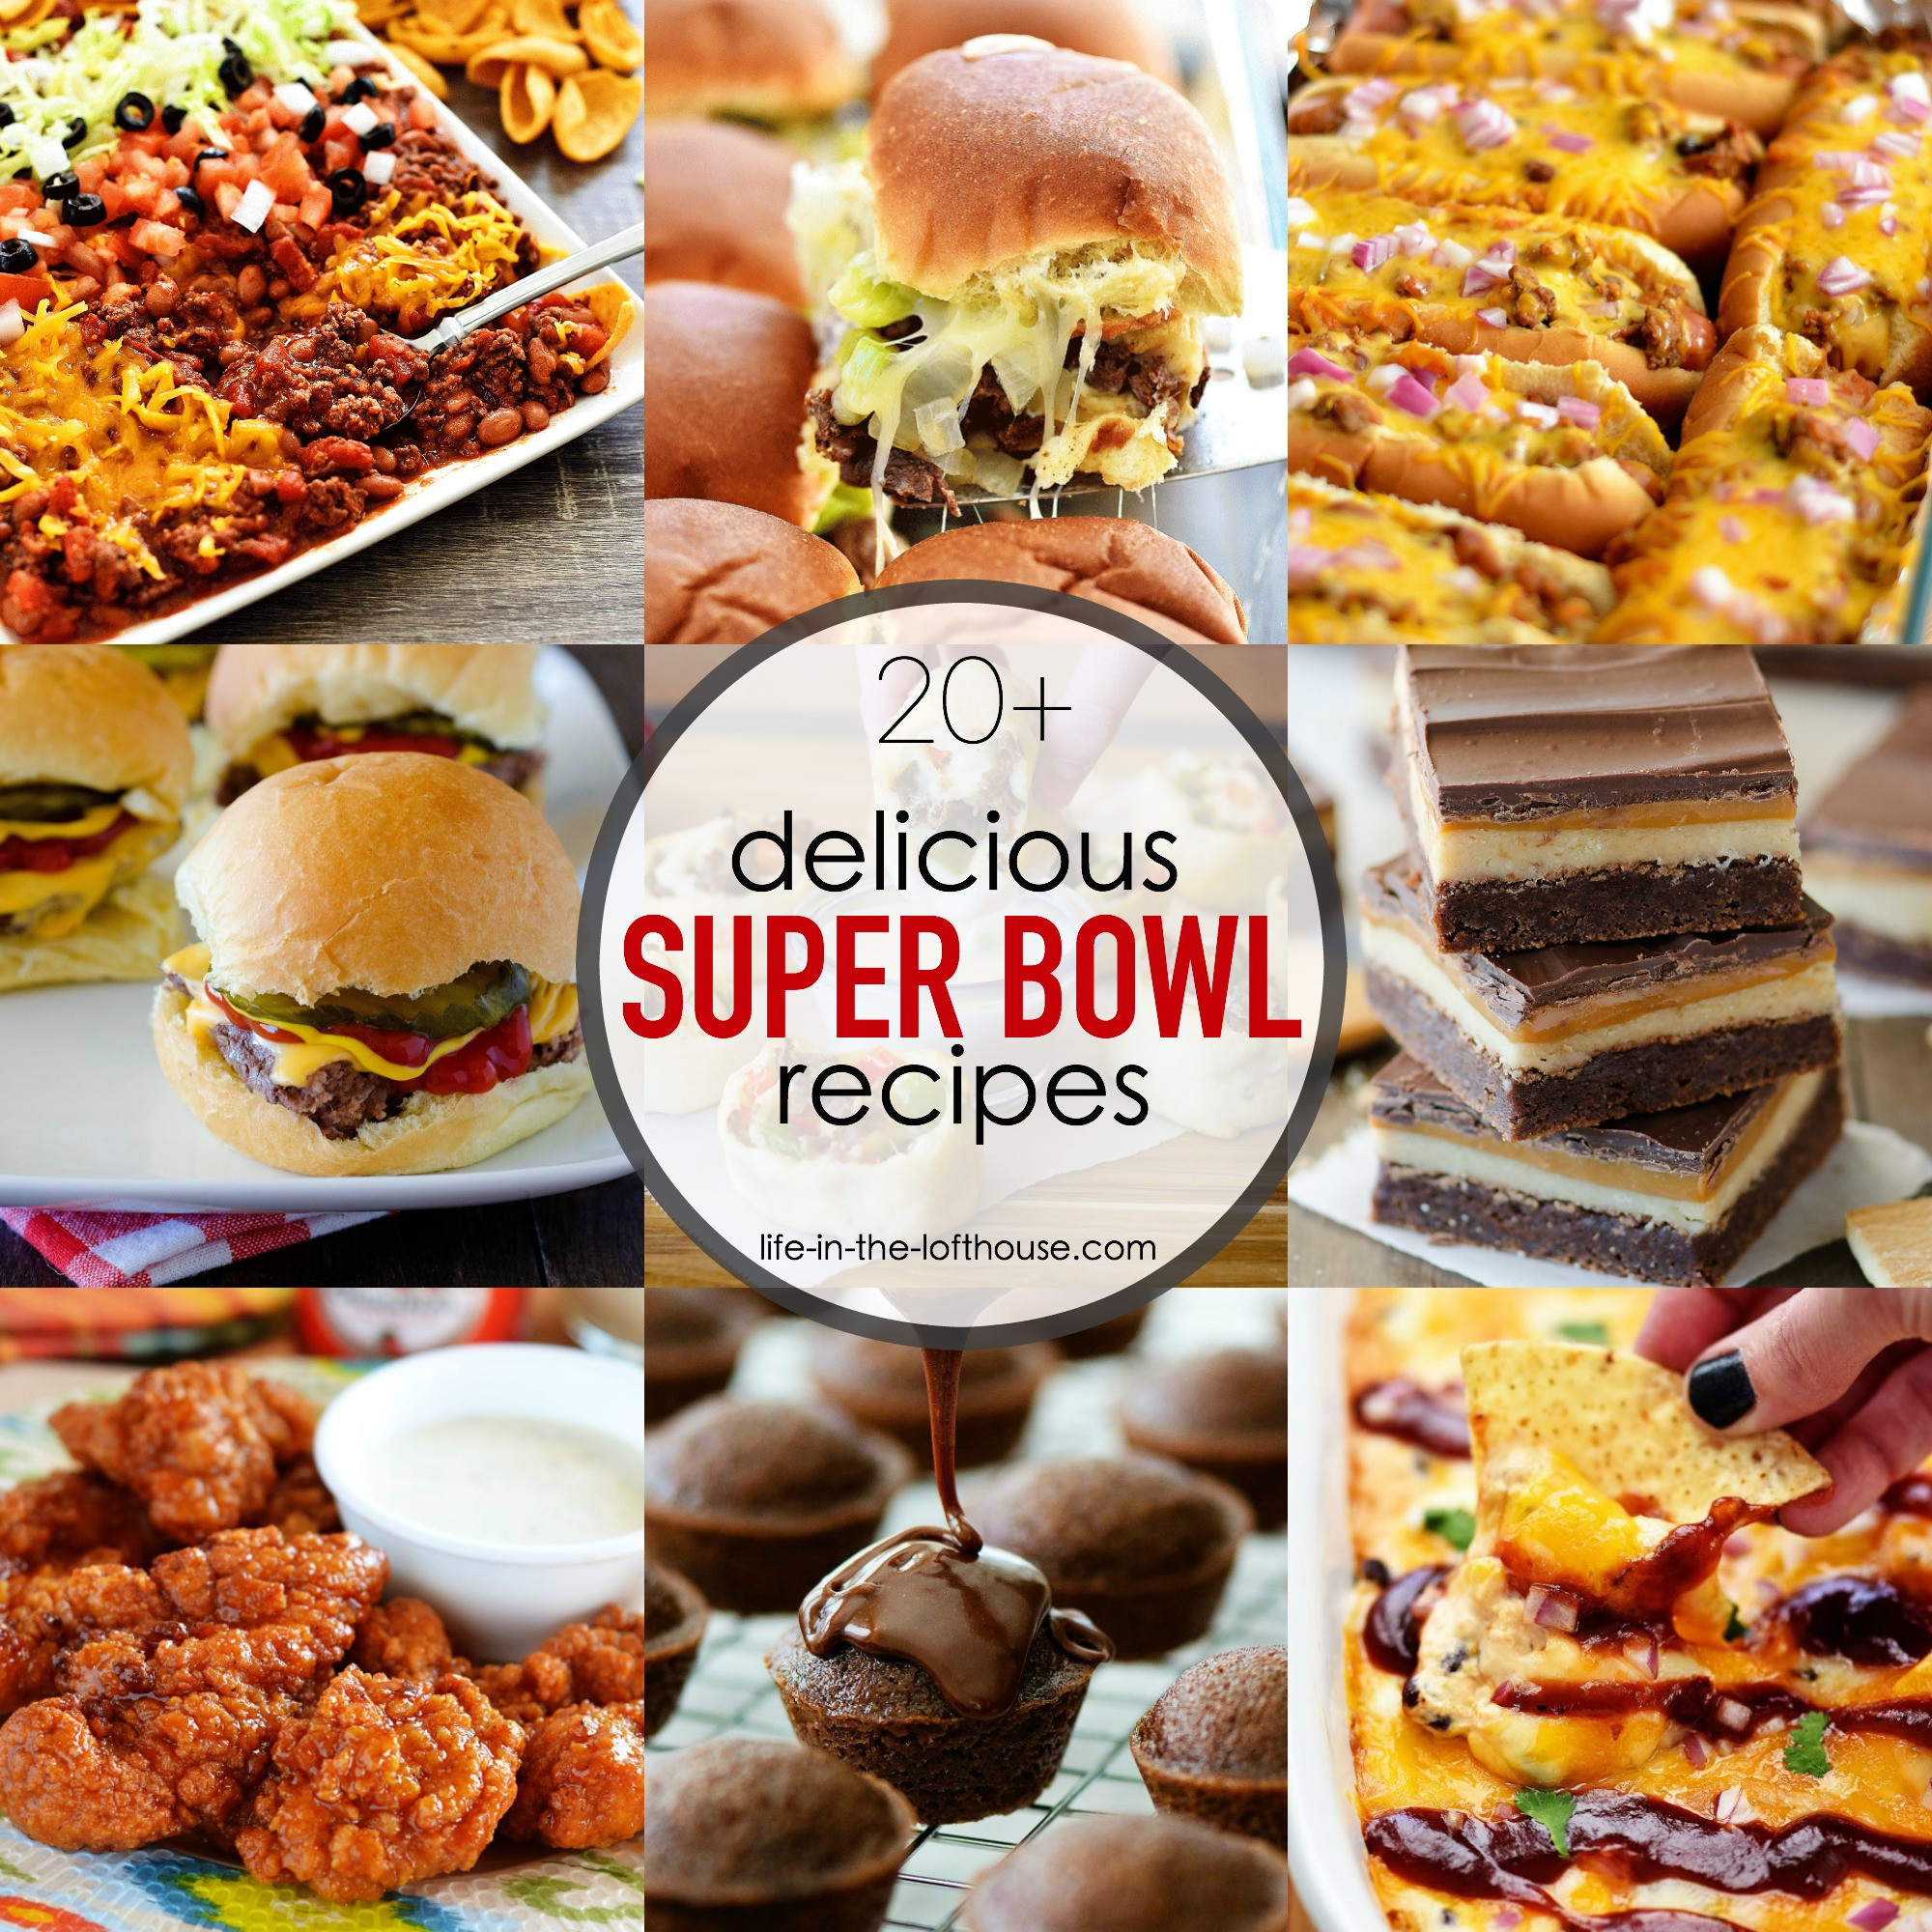 Best Super Bowl Food Recipes
 20 Super Bowl Recipes Life In The Lofthouse